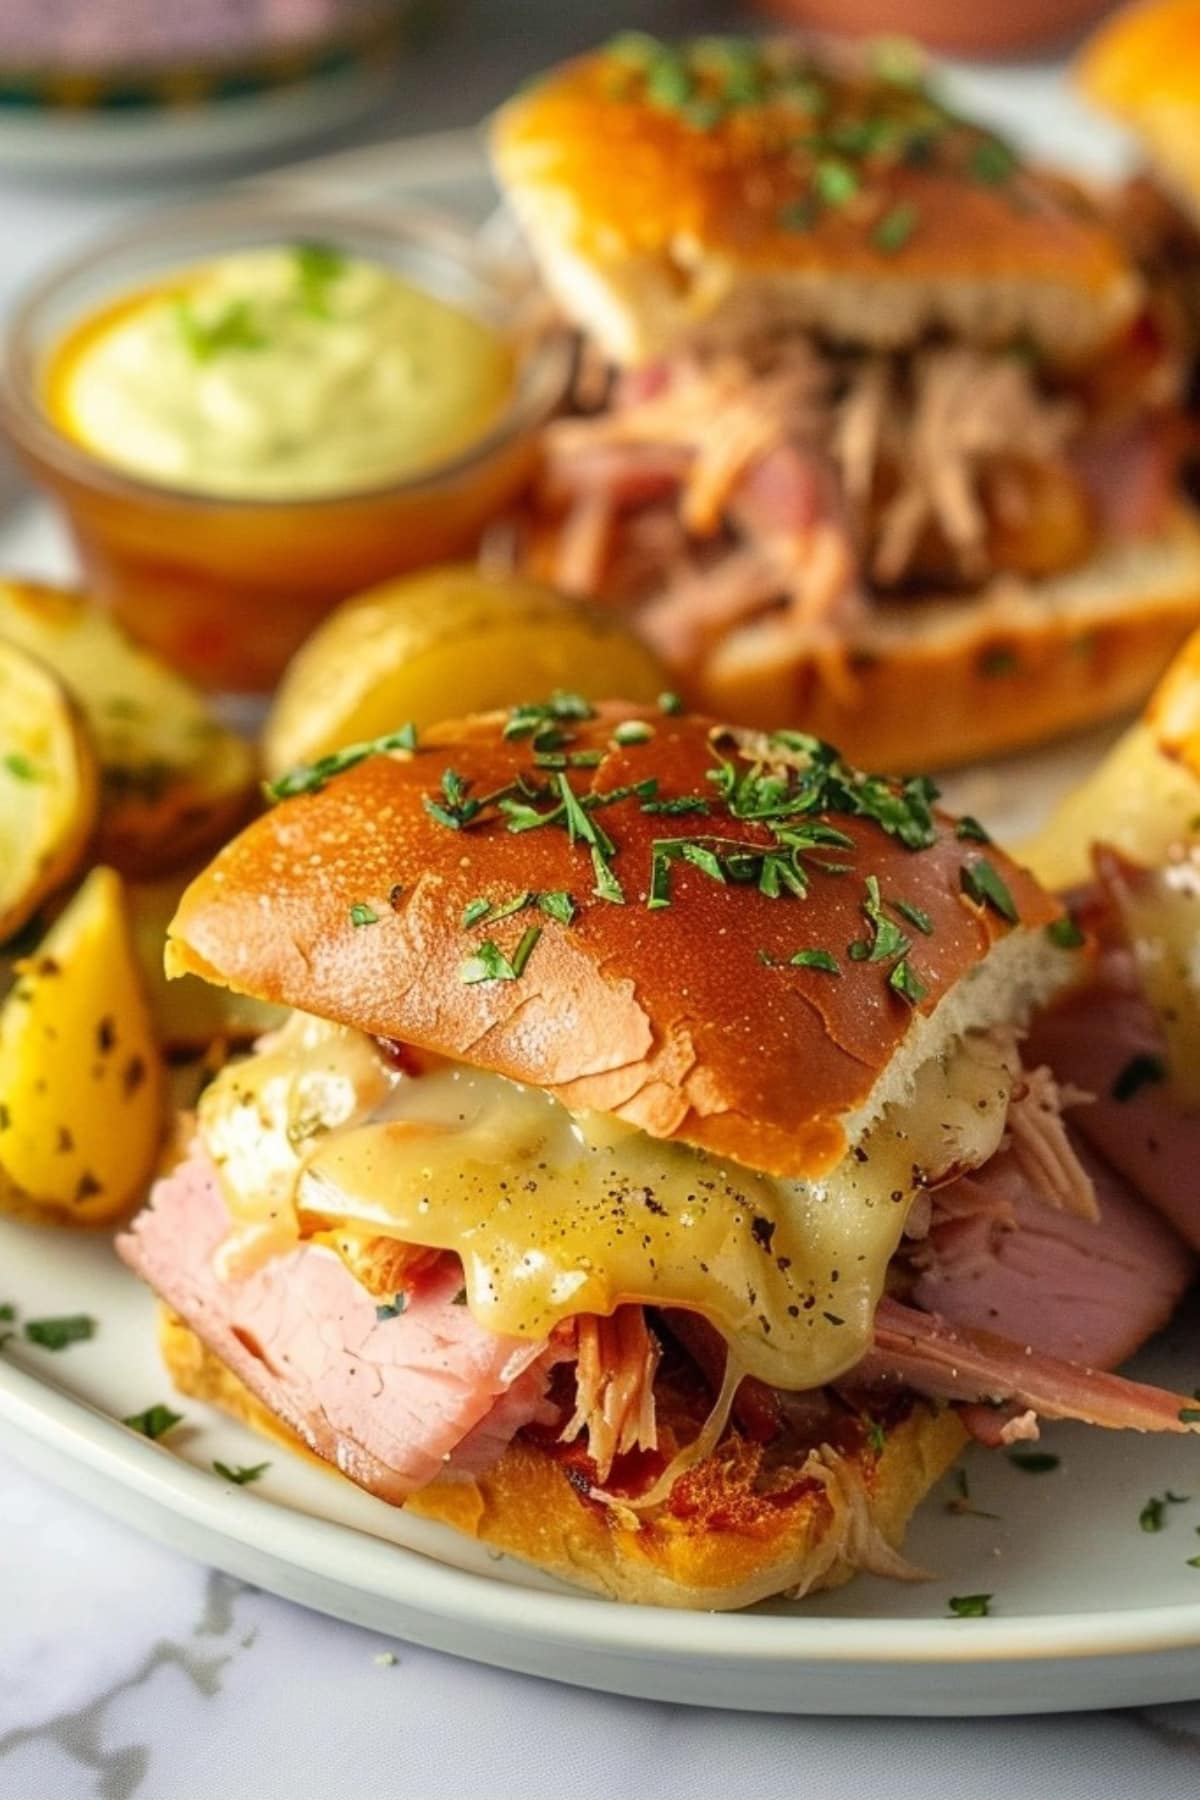 Pulled pork sliders with potatoes and dipping sauce on the side.